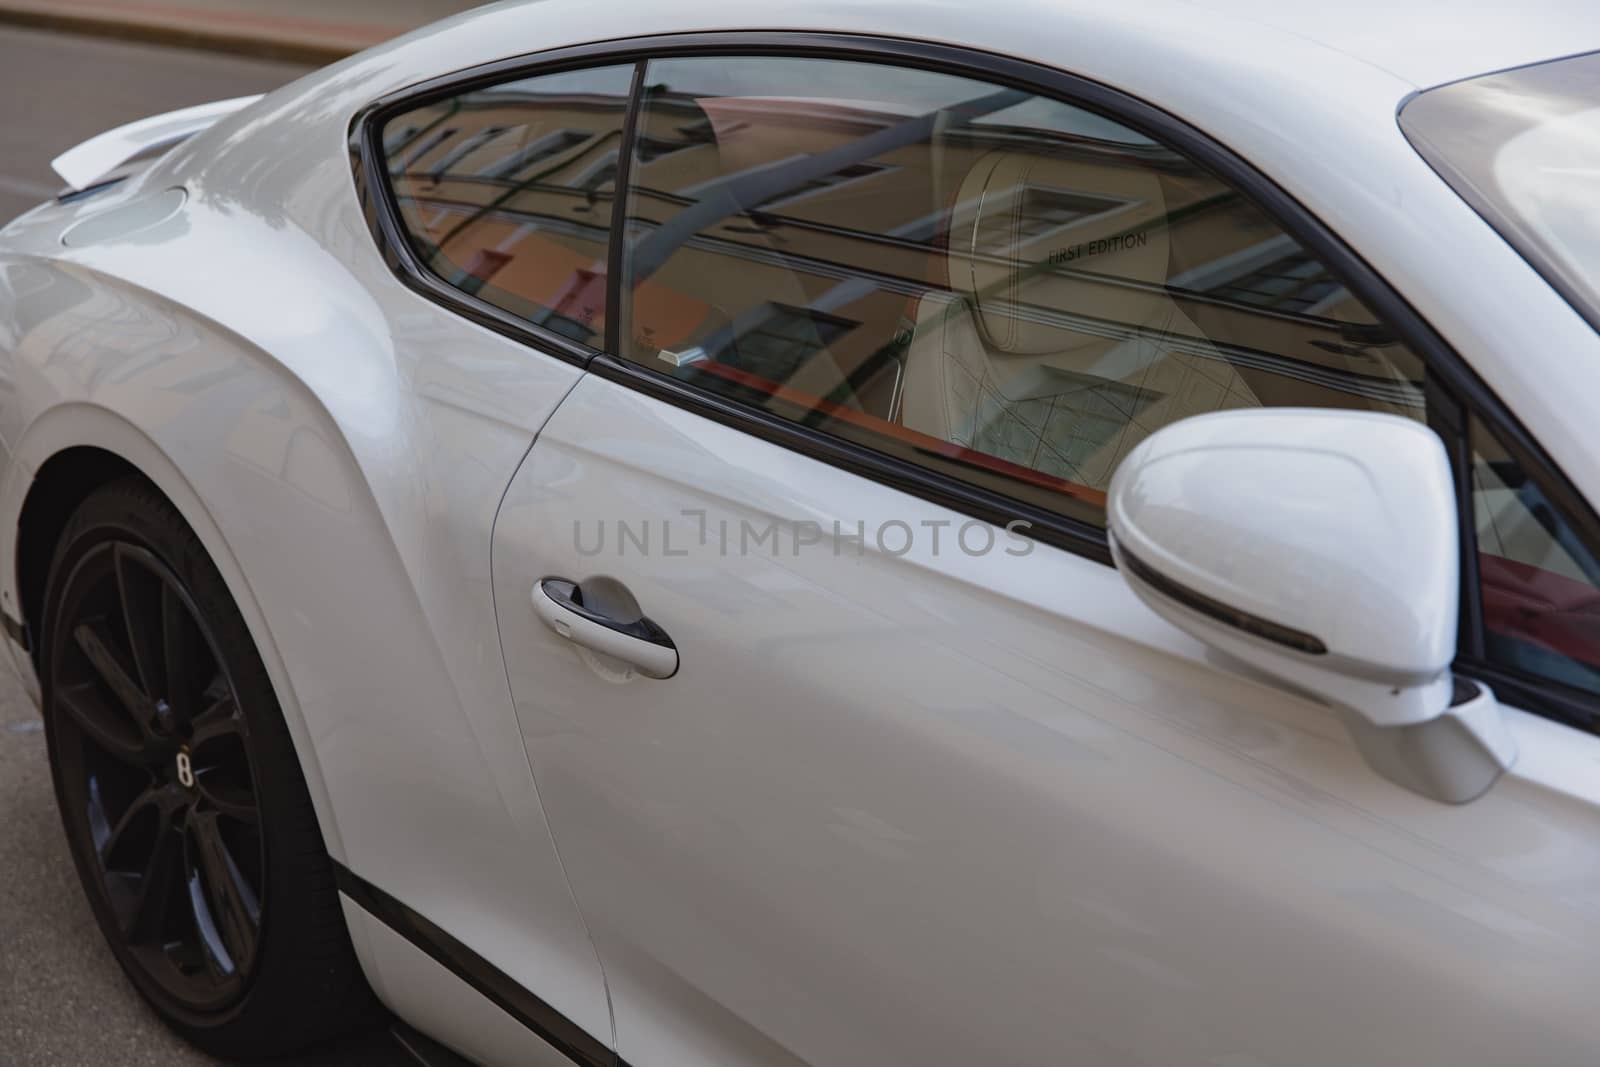 White brand new luxury sport cat Bentley Continental GT 2018 coupe by tema_rebel